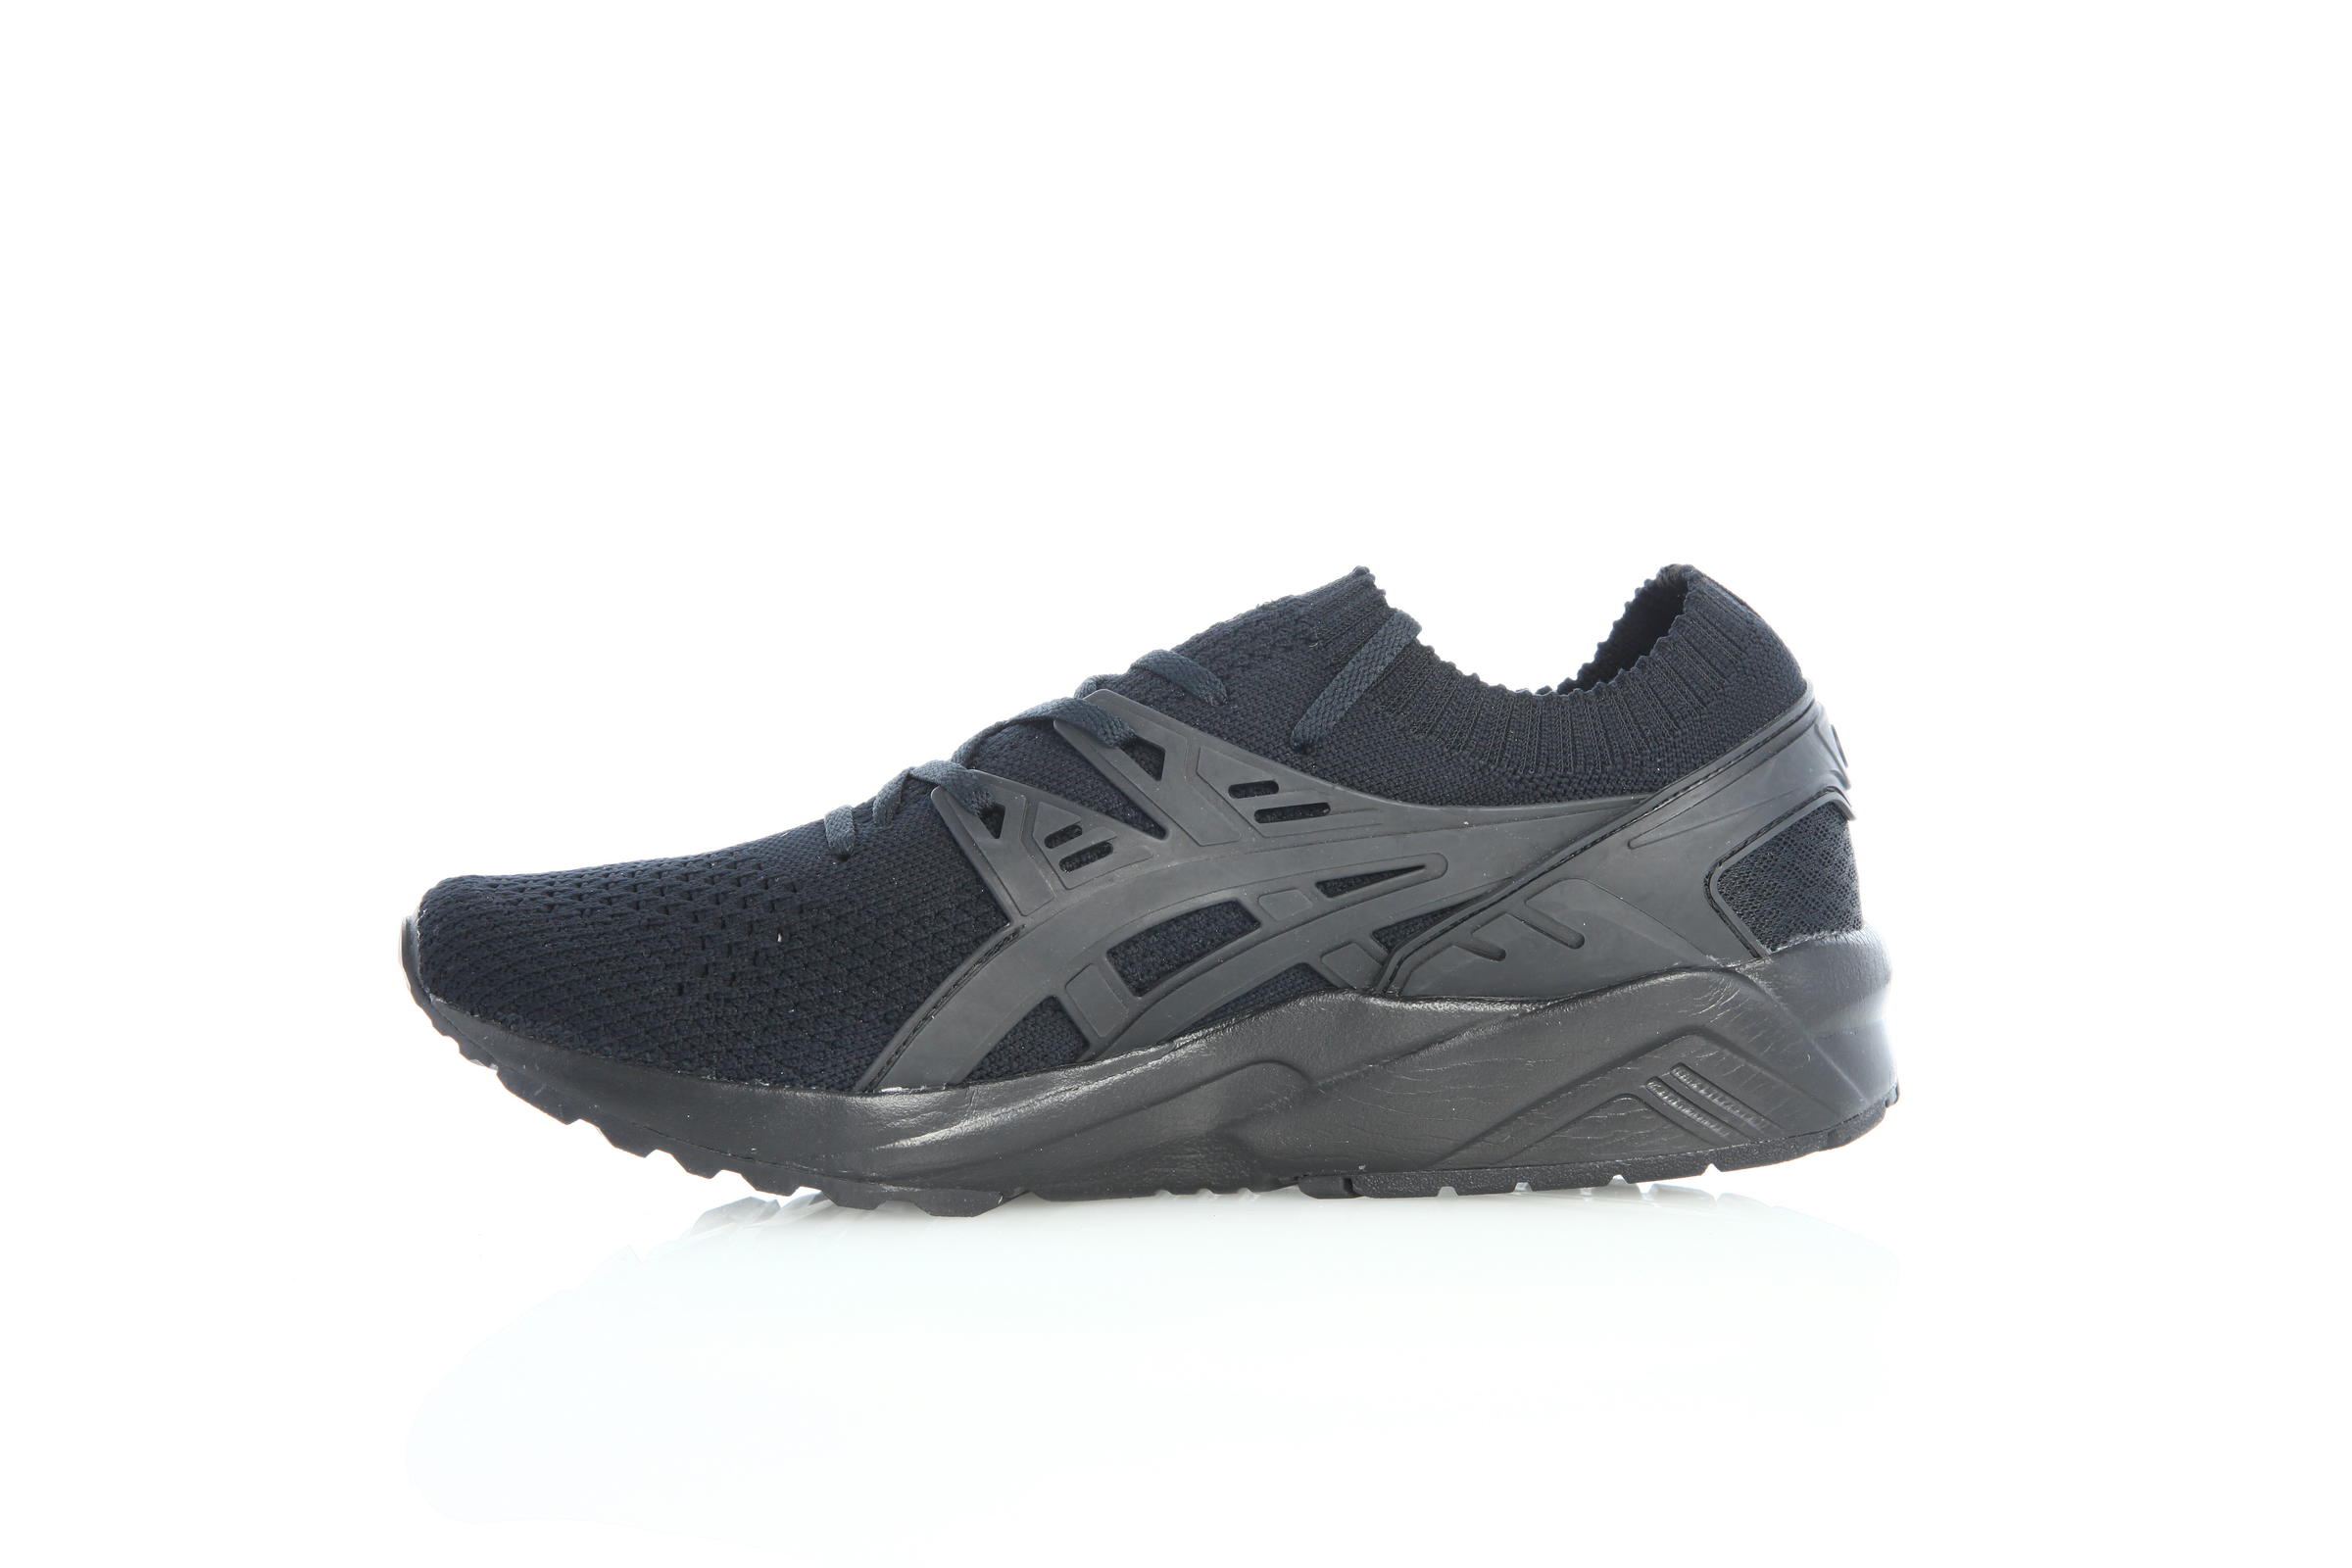 Asics Gel-Kayano Trainer One Piece Knit Pack "All Black"